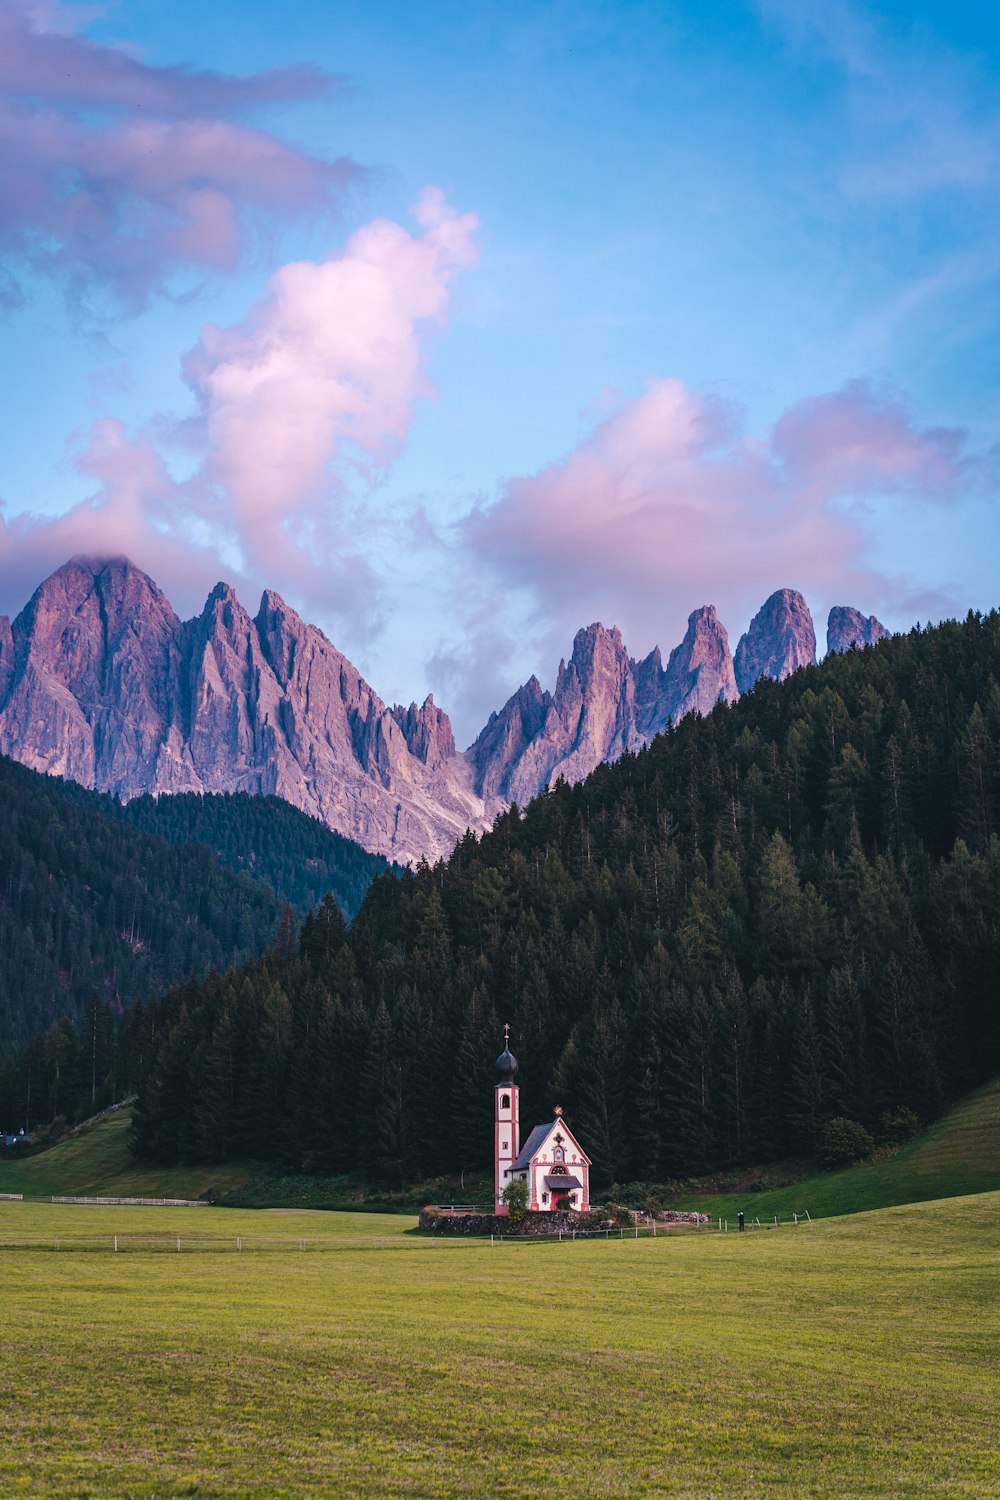 a church in a field with mountains in the background